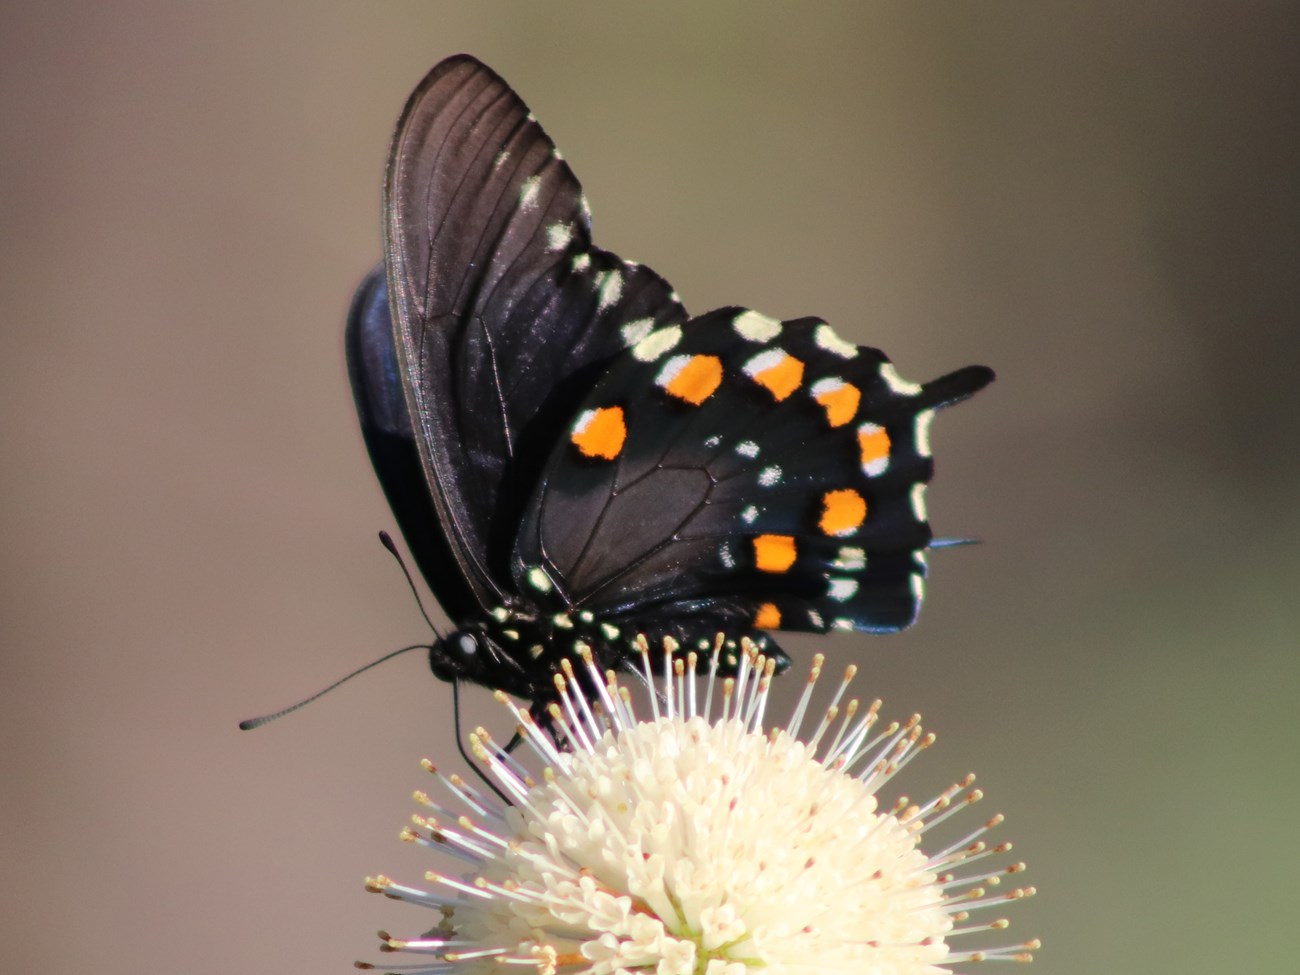 dark-winged butterfly with orange and white spots on the undersides sitting on round white flower